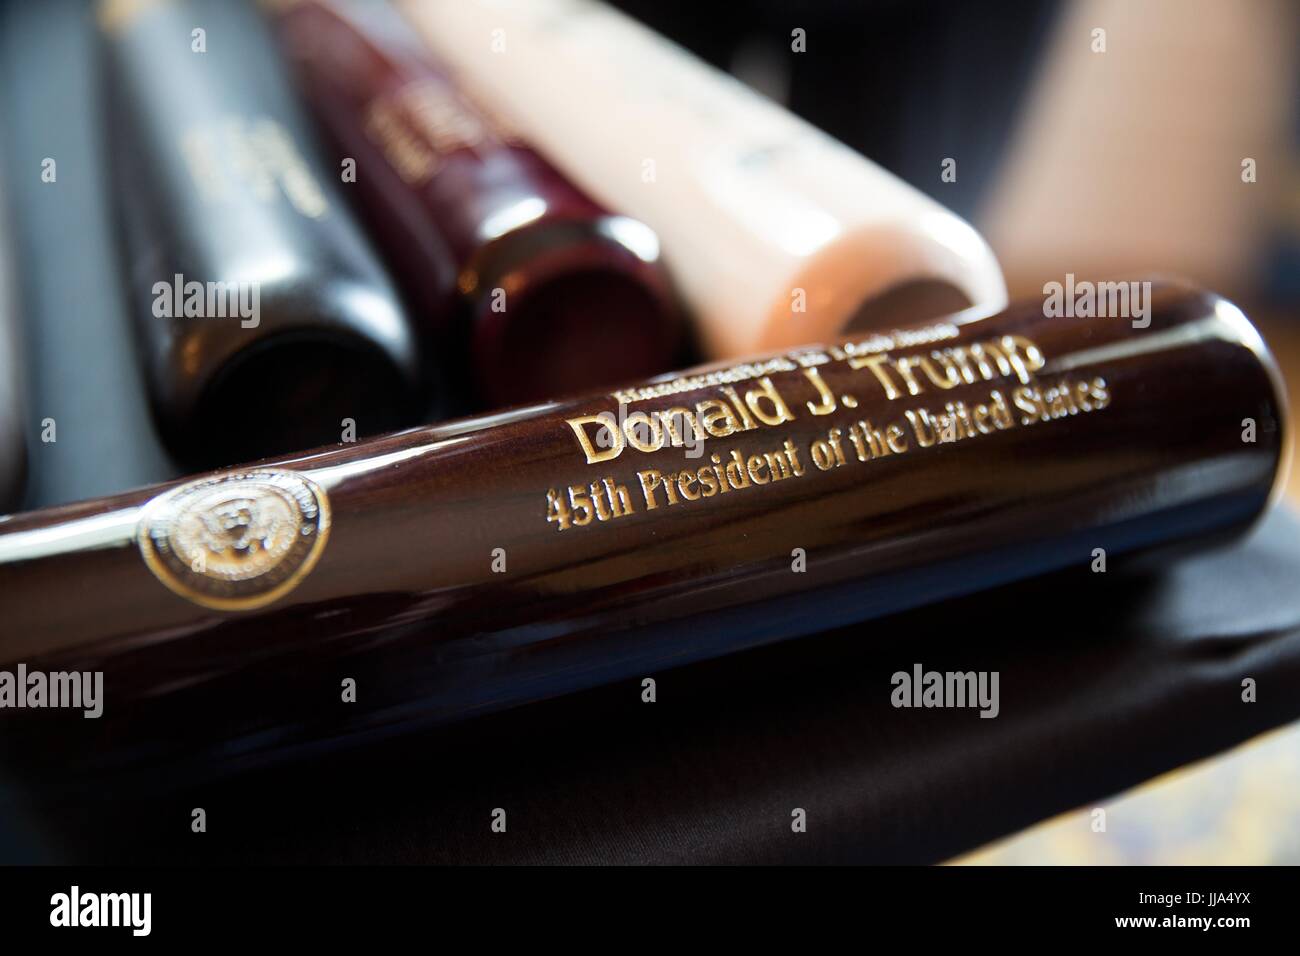 Washington, United States Of America. 18th July, 2017. A U.S made Marucci baseball bat engraved for President Donald Trump on display during a Made in America product showcase featuring items created in each of the 50 states in the Blue Room of the White House July 17, 2017 in Washington, DC. Credit: Planetpix/Alamy Live News Stock Photo